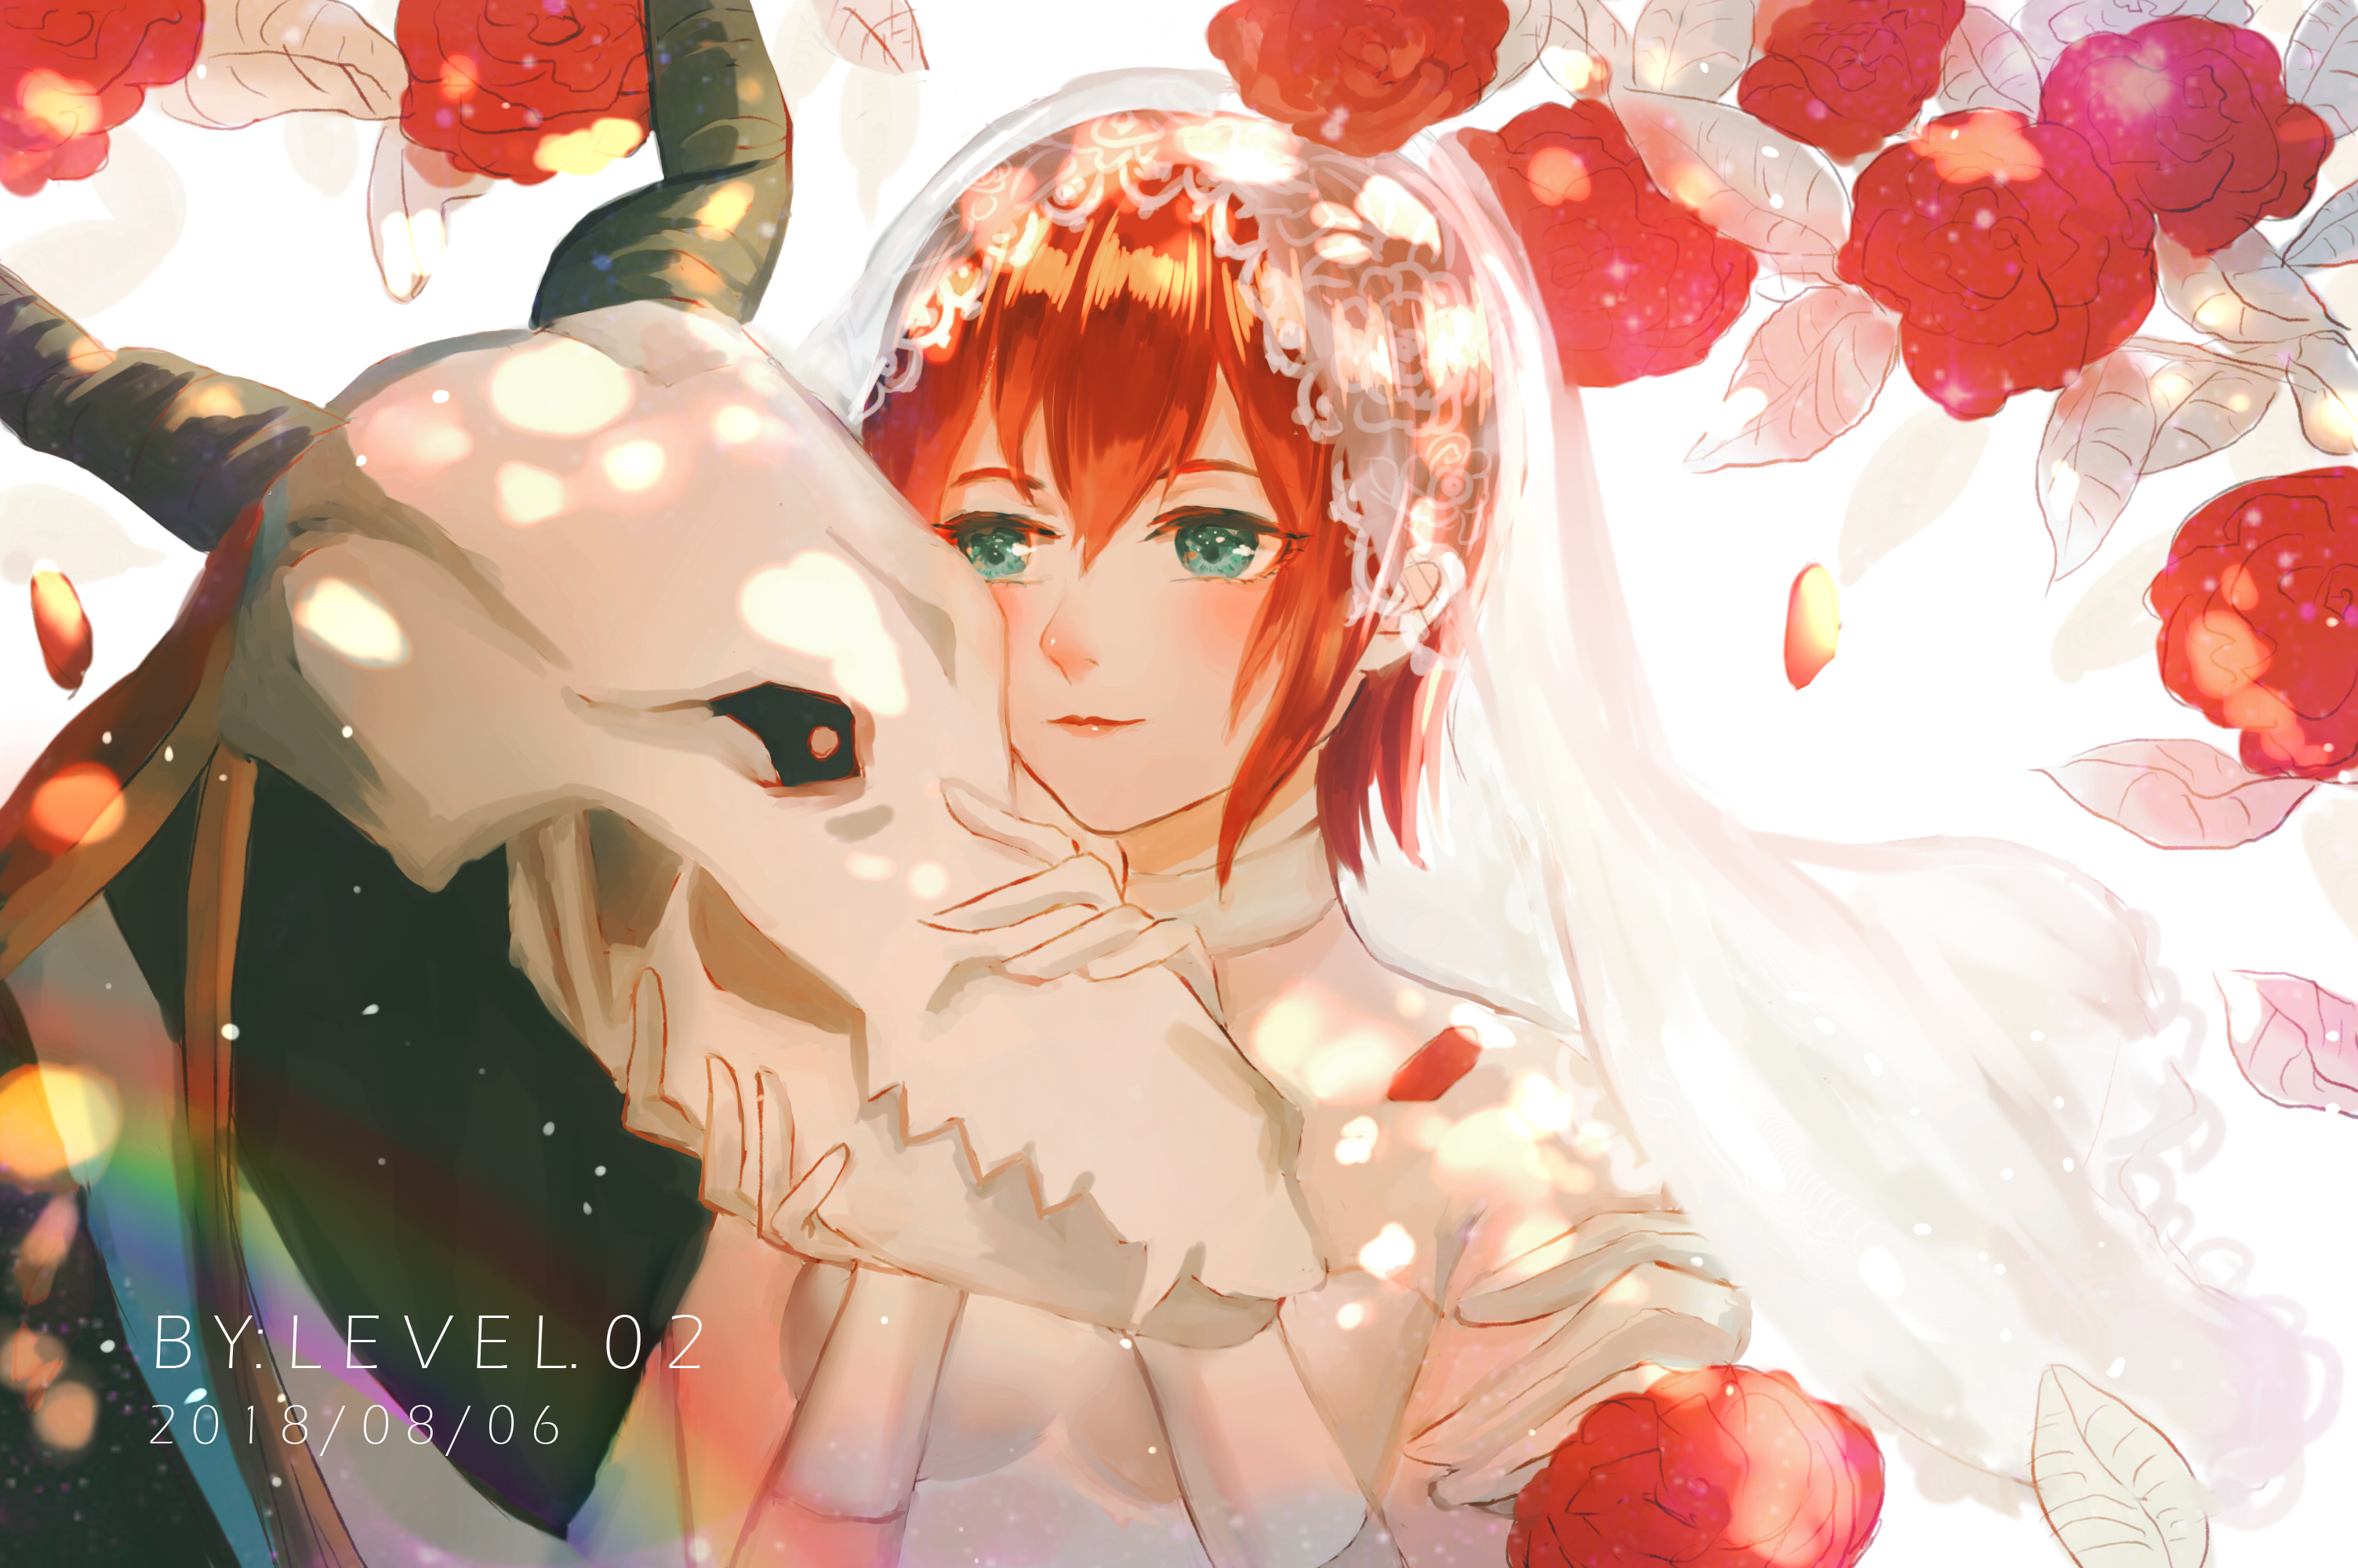 The Ancient Magus' Bride HD Wallpaper by LEVEL.02